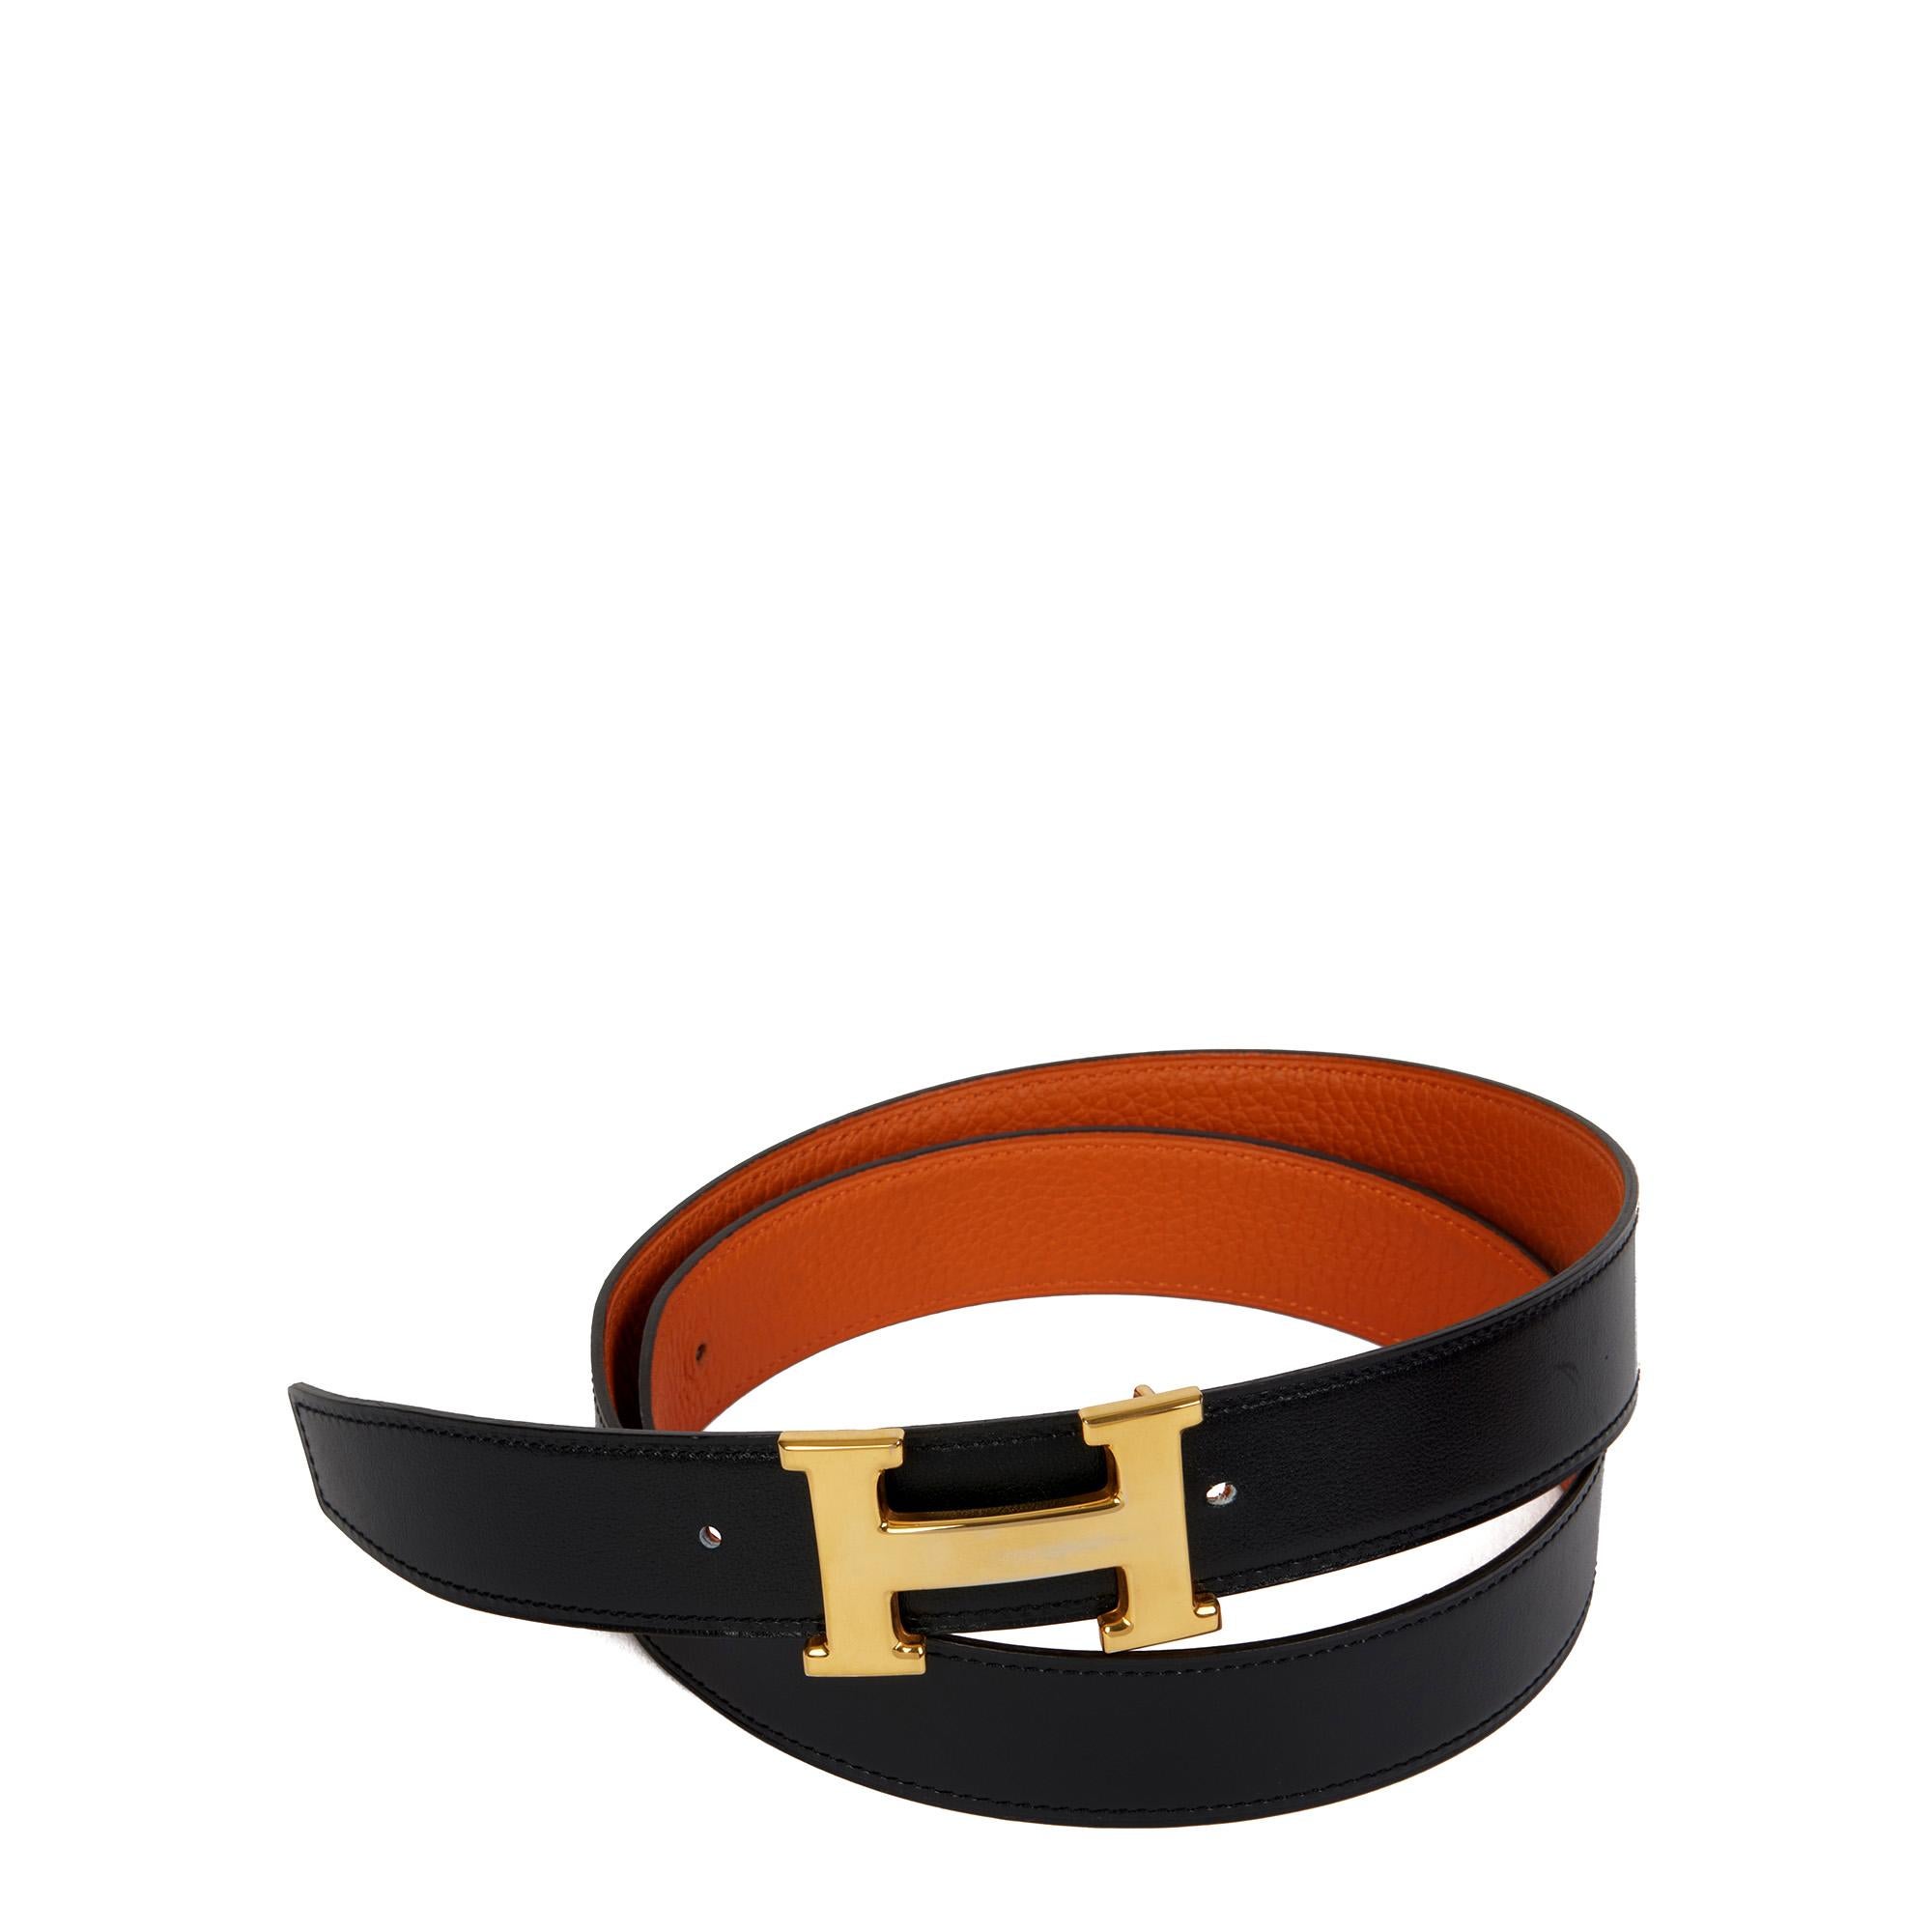 Hermès BLACK BOX CALF LEATHER & ORANGE H TOGO LEATHER CONSTANCE BELT BUCKLE & REVERSIBLE LEATHER STRAP 32MM

CONDITION NOTES
The exterior is in good condition with minimal signs of use.
Overall this item is in good pre-owned condition. Please note